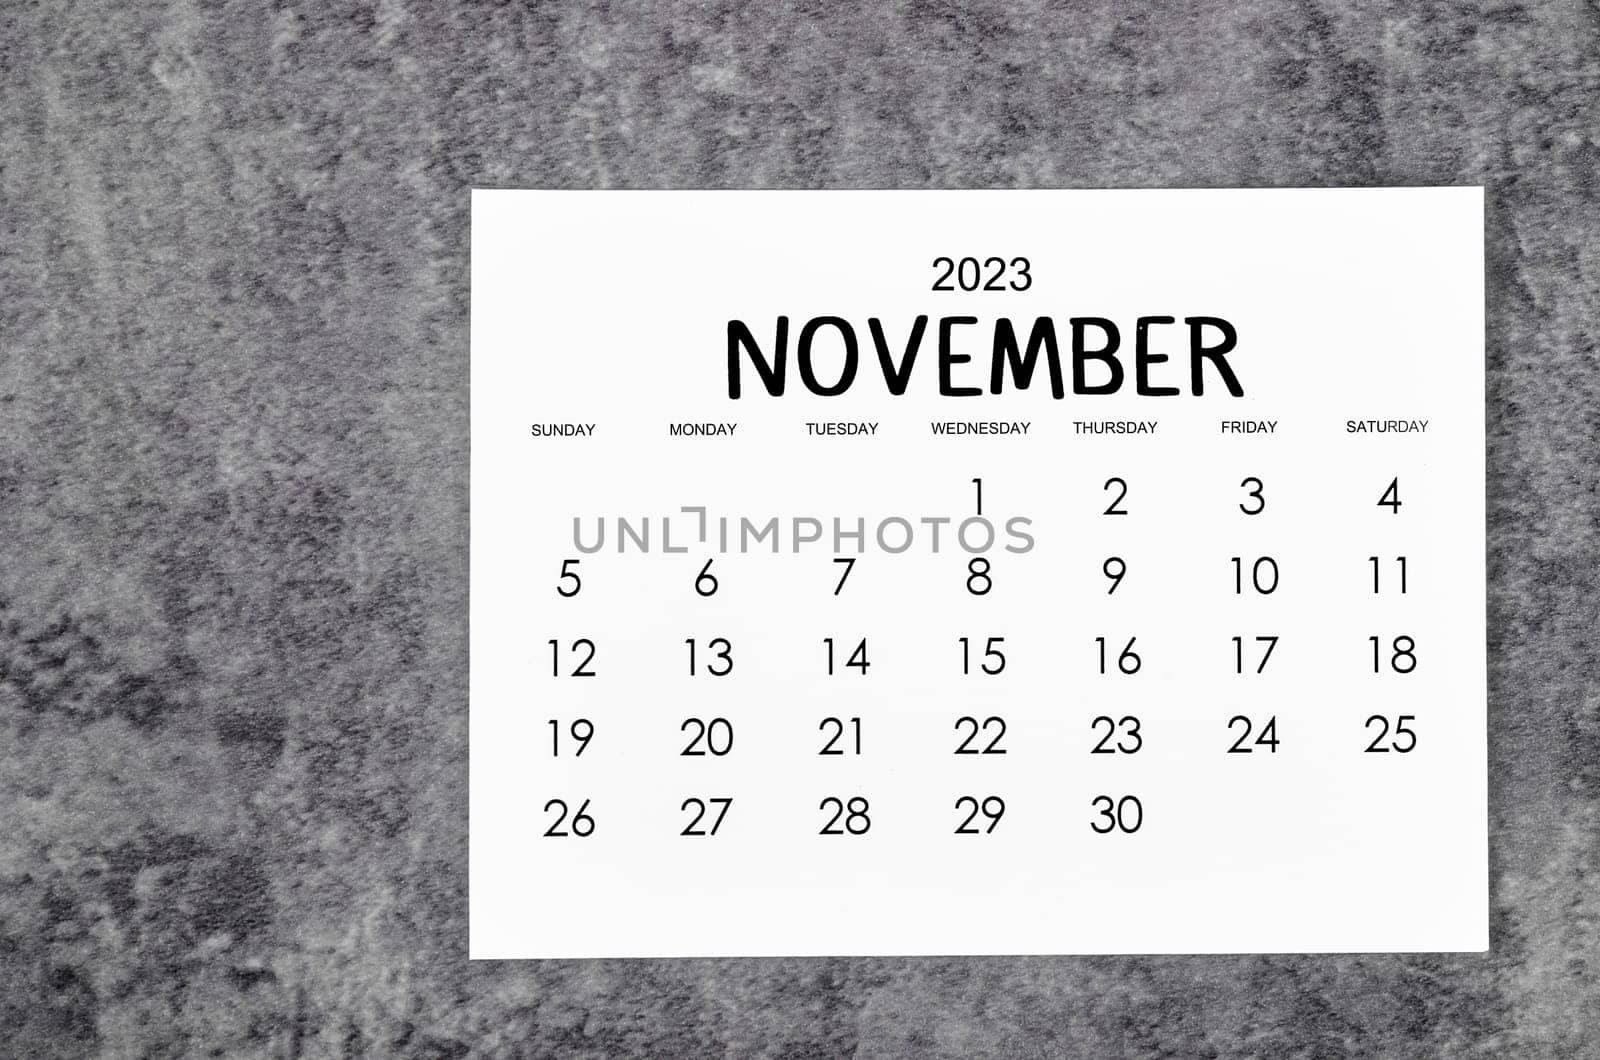 The November 2023 Monthly calendar for 2023 year on grunge background. by Gamjai